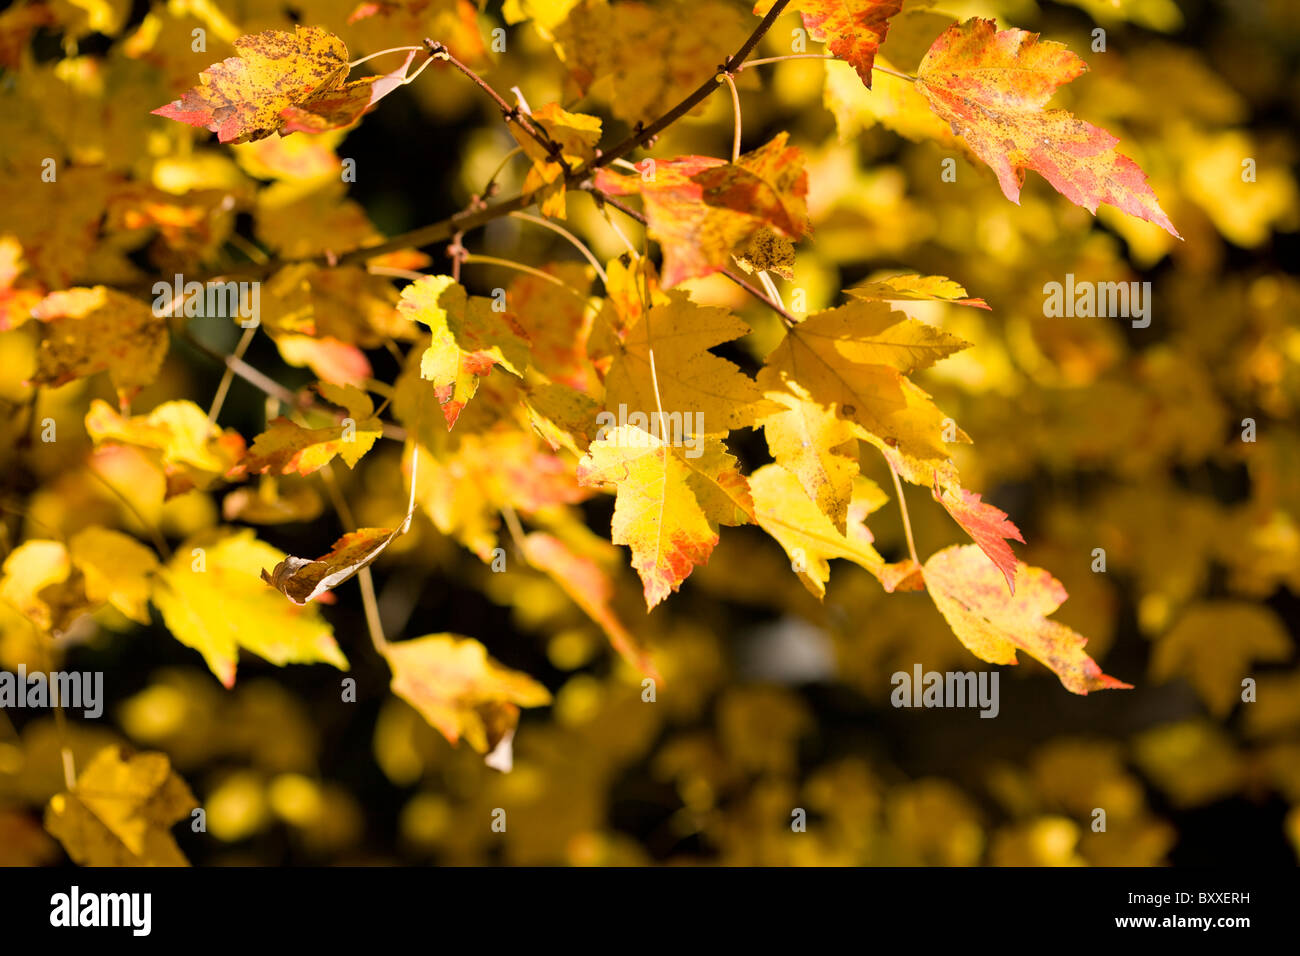 Sugar Maple (Acer saccharum Marsh.) tree leaves turning colour in early autumn Stock Photo